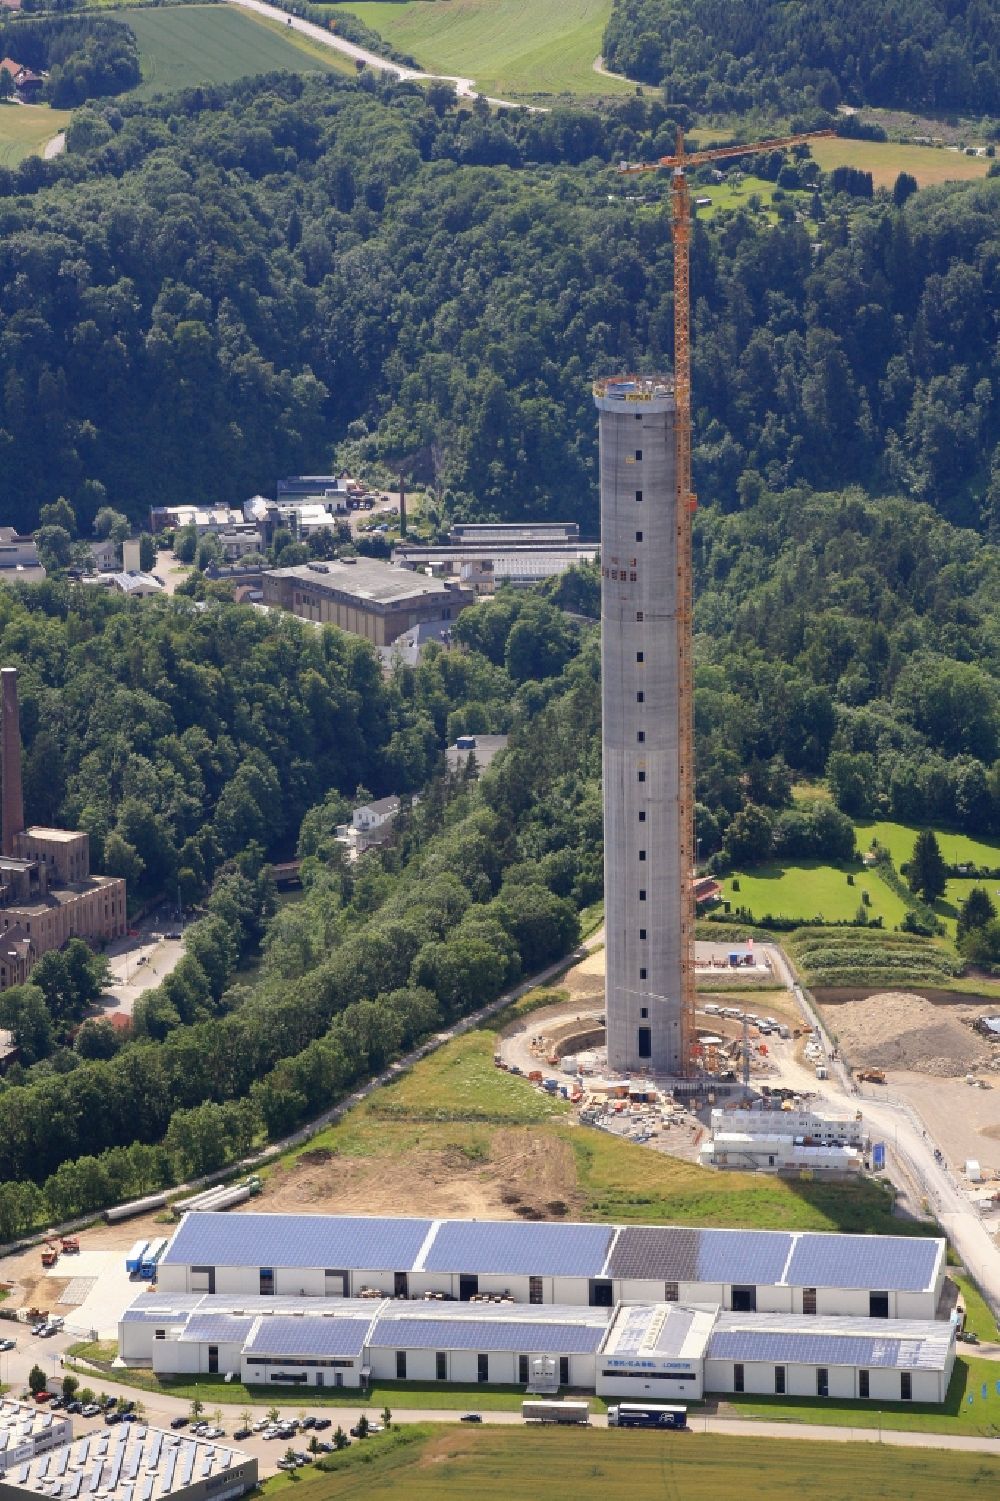 Aerial photograph Rottweil - Construction and construction site of the ThyssenKrupp testing tower for Speed elevators in Rottweil in Baden - Wuerttemberg. When finished the new landmark of the town of Rottweil will be the tallest structure in Baden-Wuerttemberg